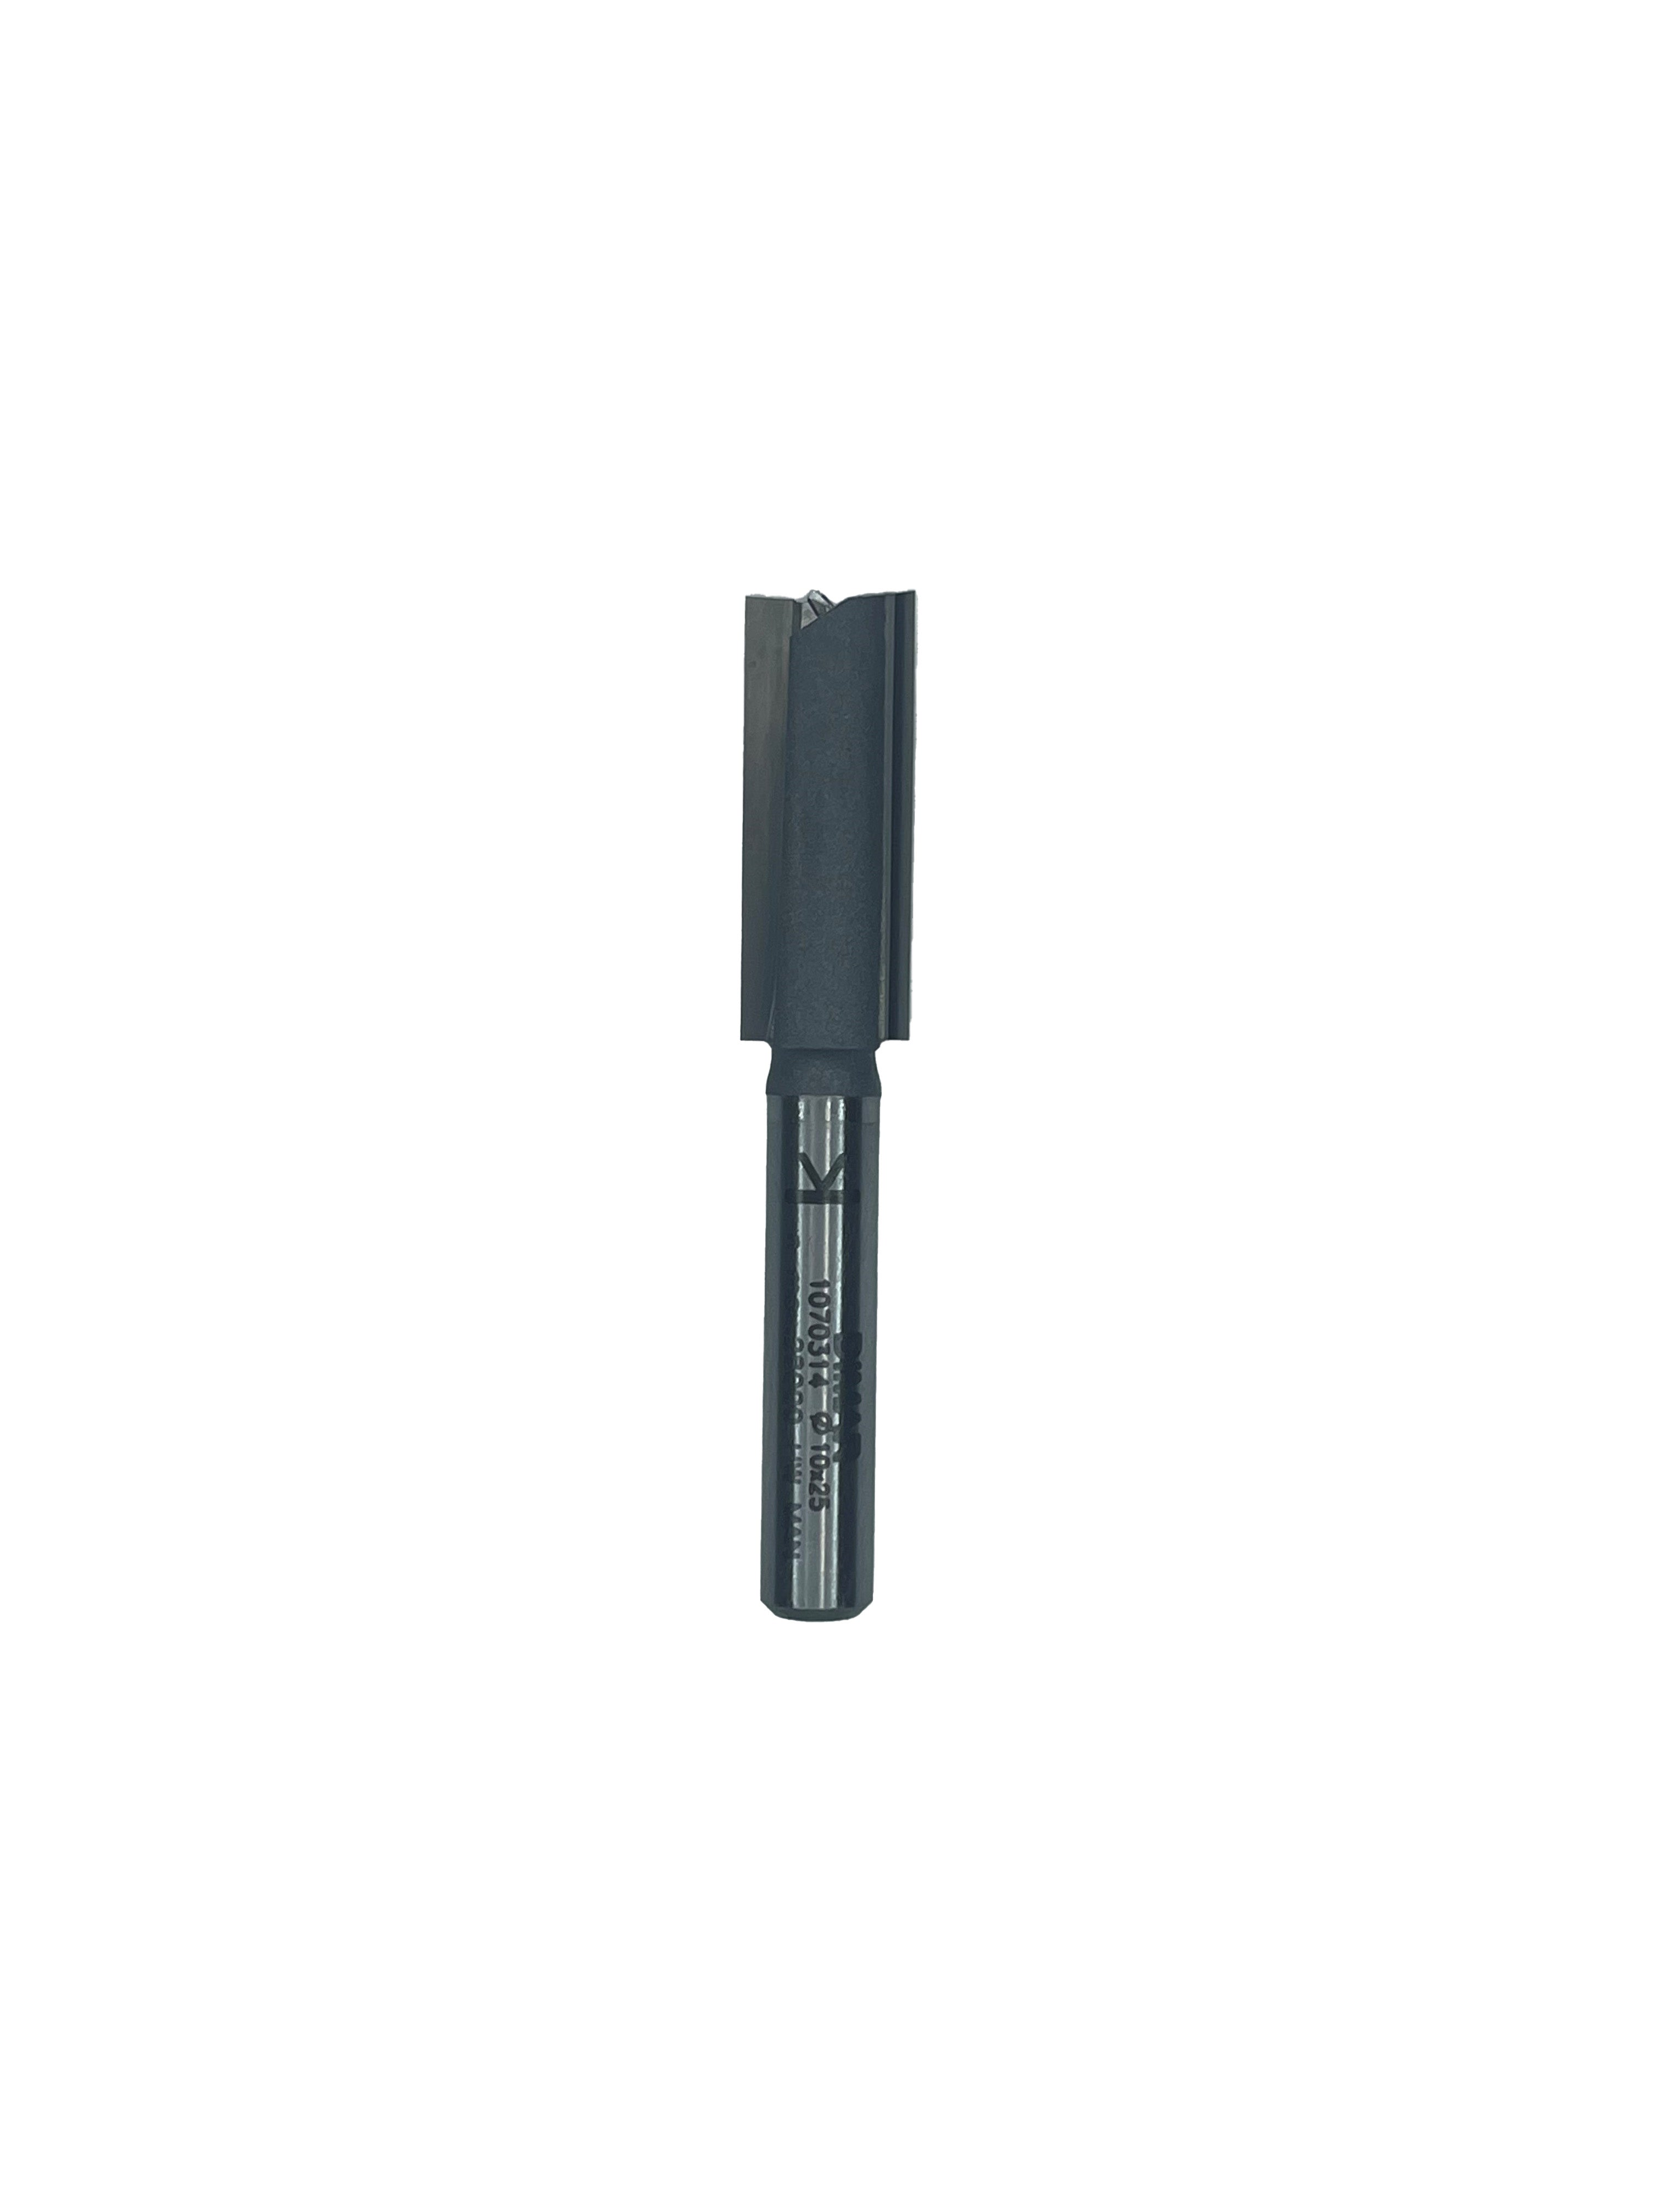 Dimar Straight, 10.00 X 25.00Mm Power Tool Services